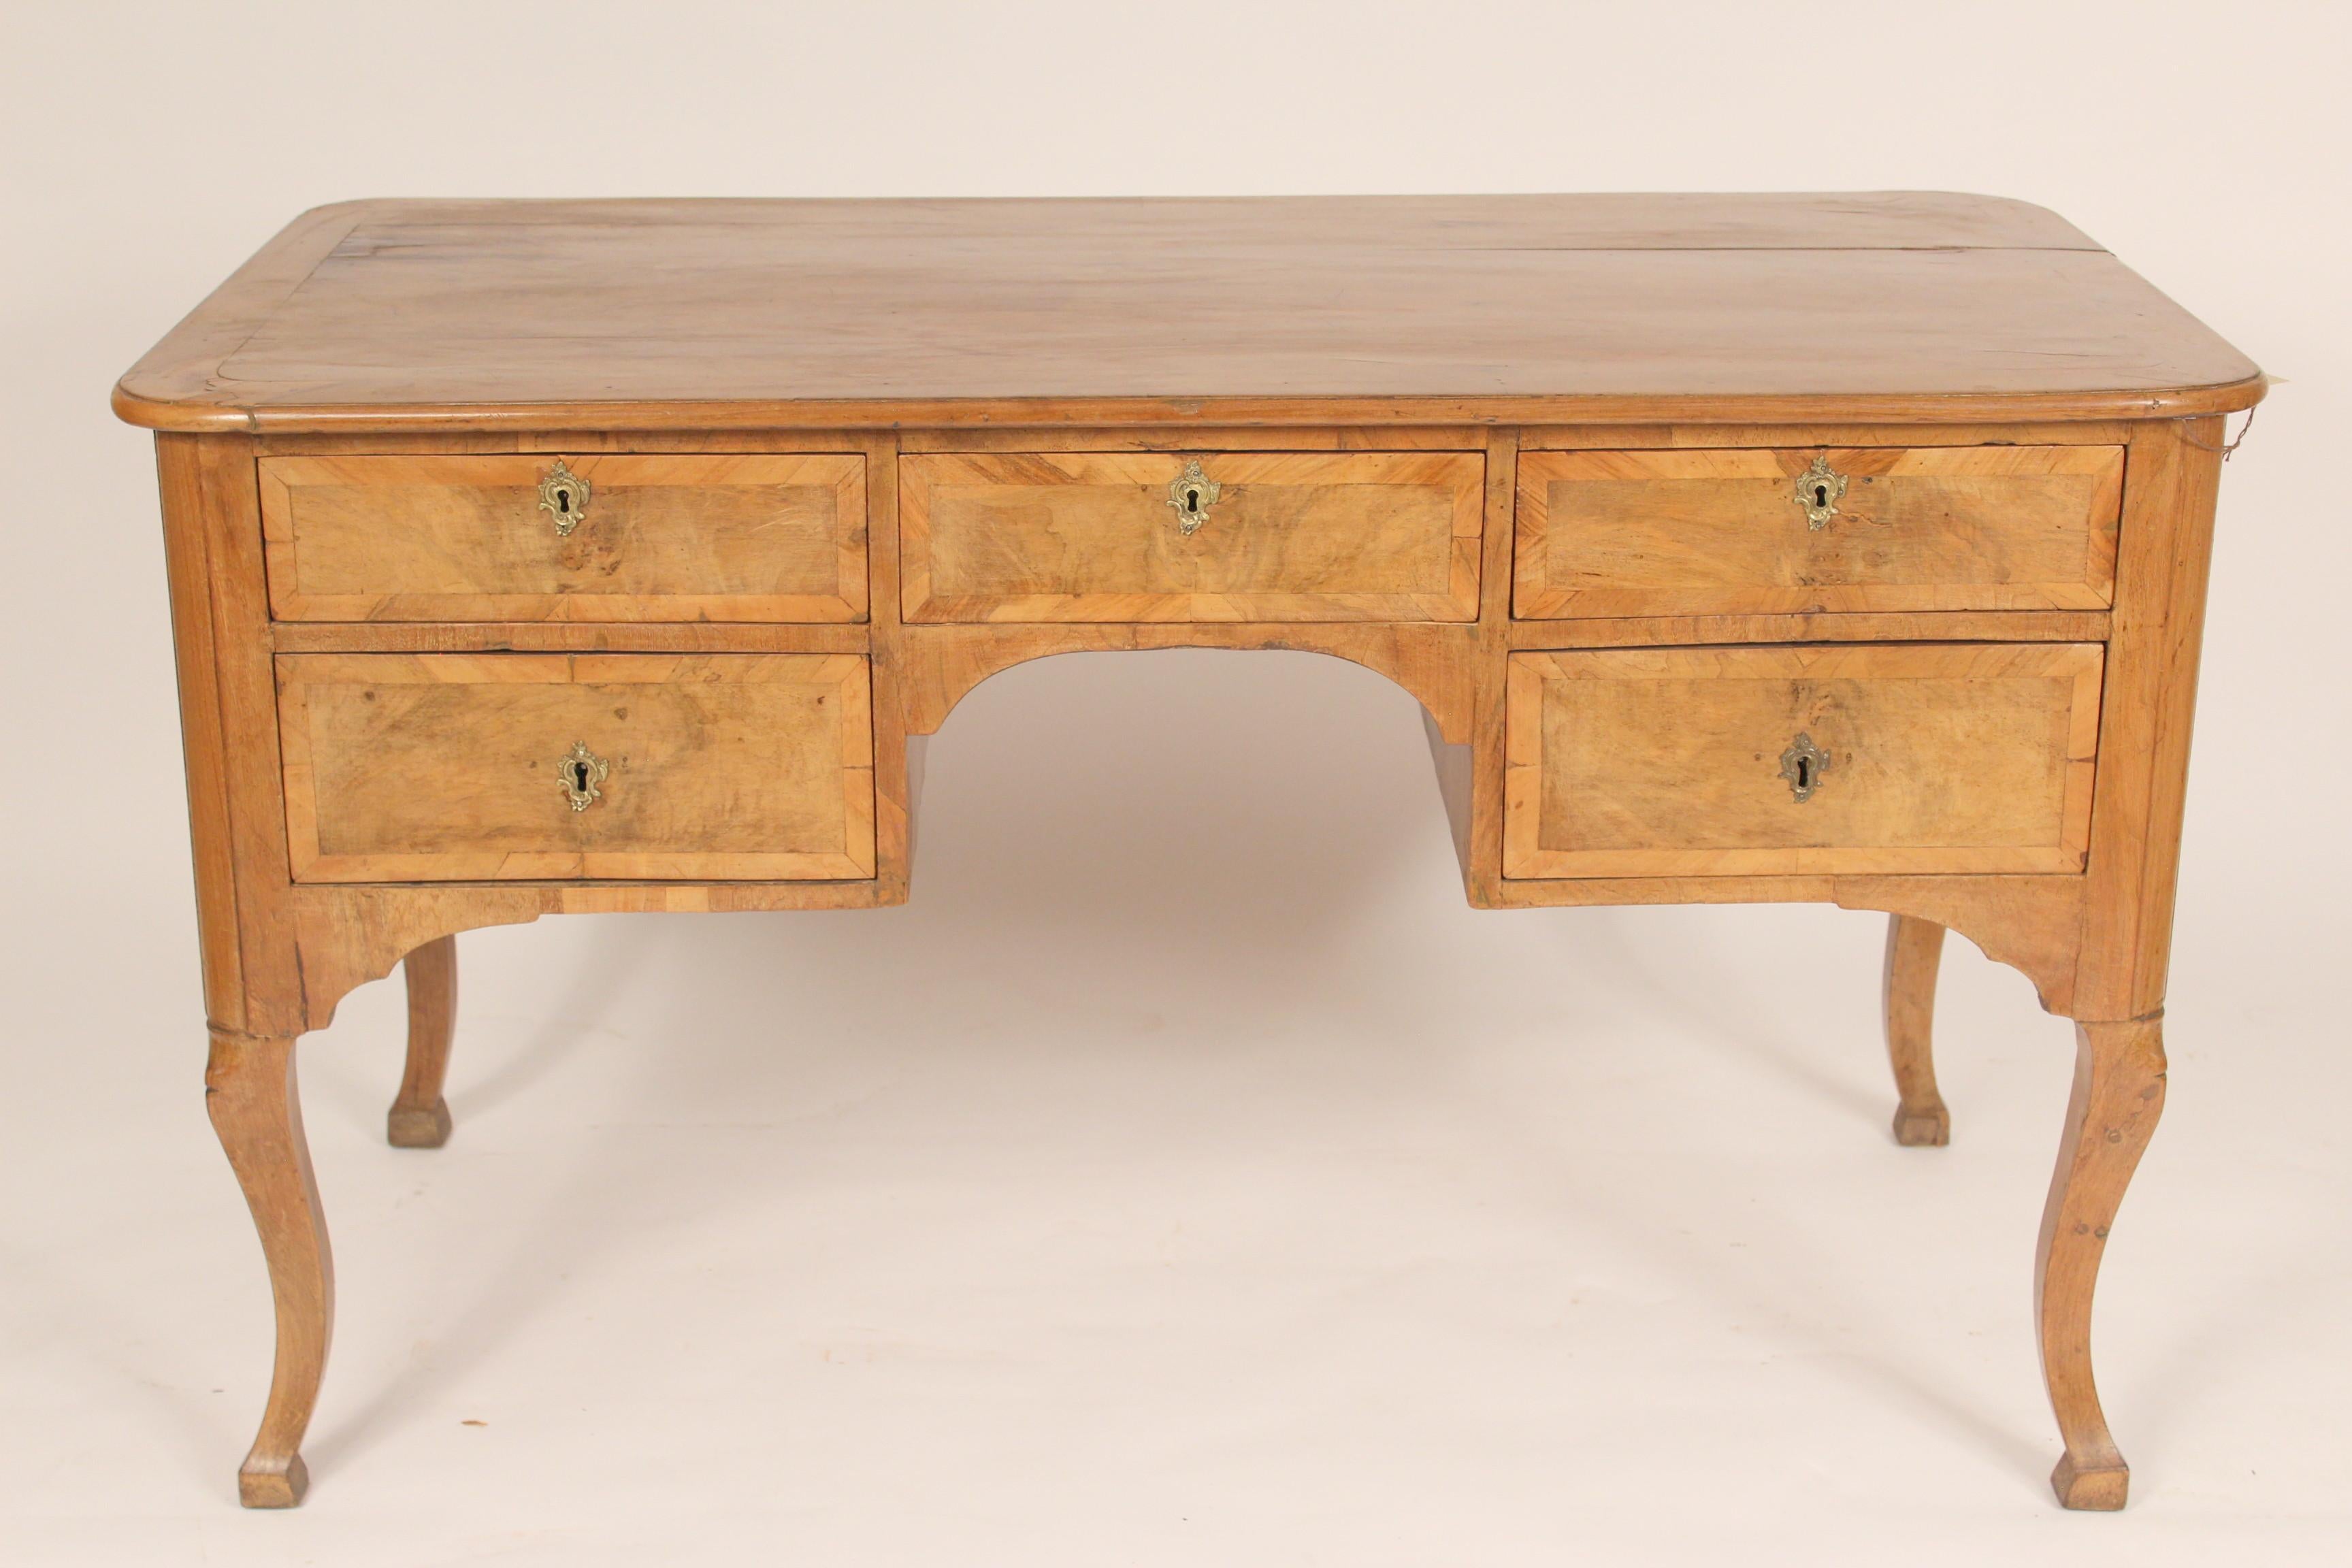 Antique continental Louis XV style walnut and beech wood desk, late 19th century. Nice color. Hand dove tailed drawer construction. Height of center of knee hole to floor 24